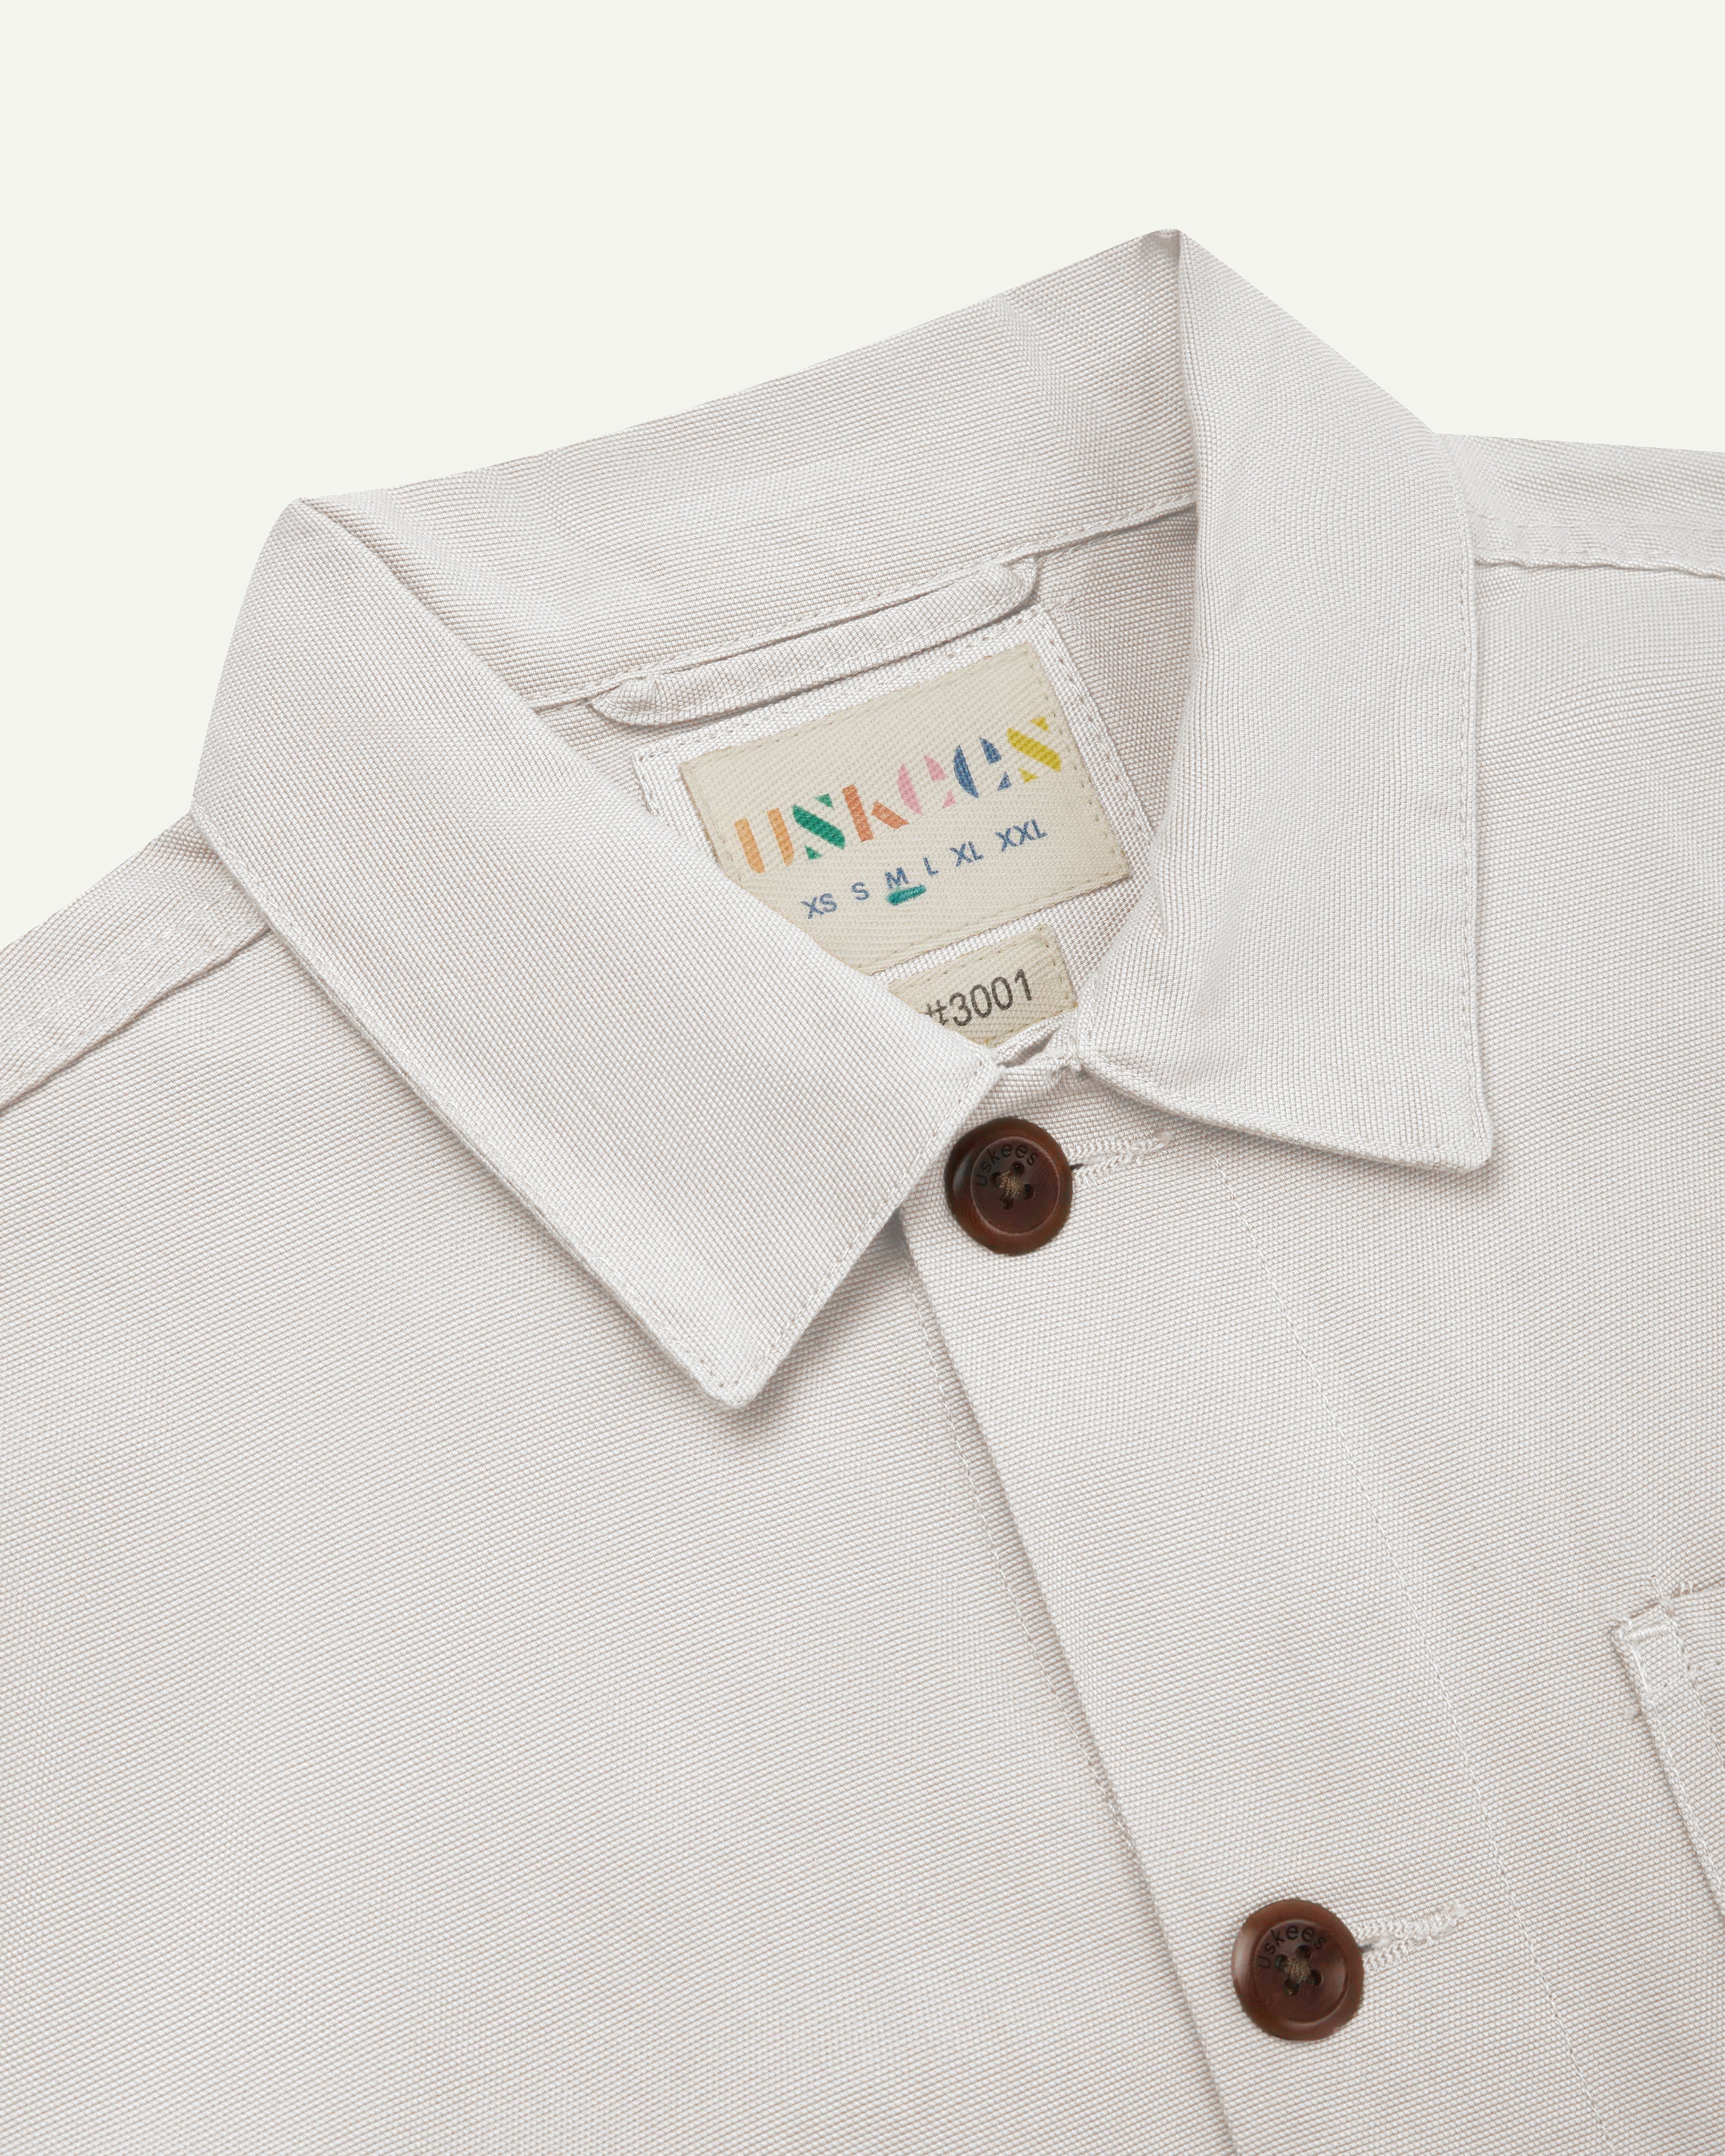 Front close shot of an uskees cream men's overshirt showing contrast brown corozo buttons and brand/size label at neck.